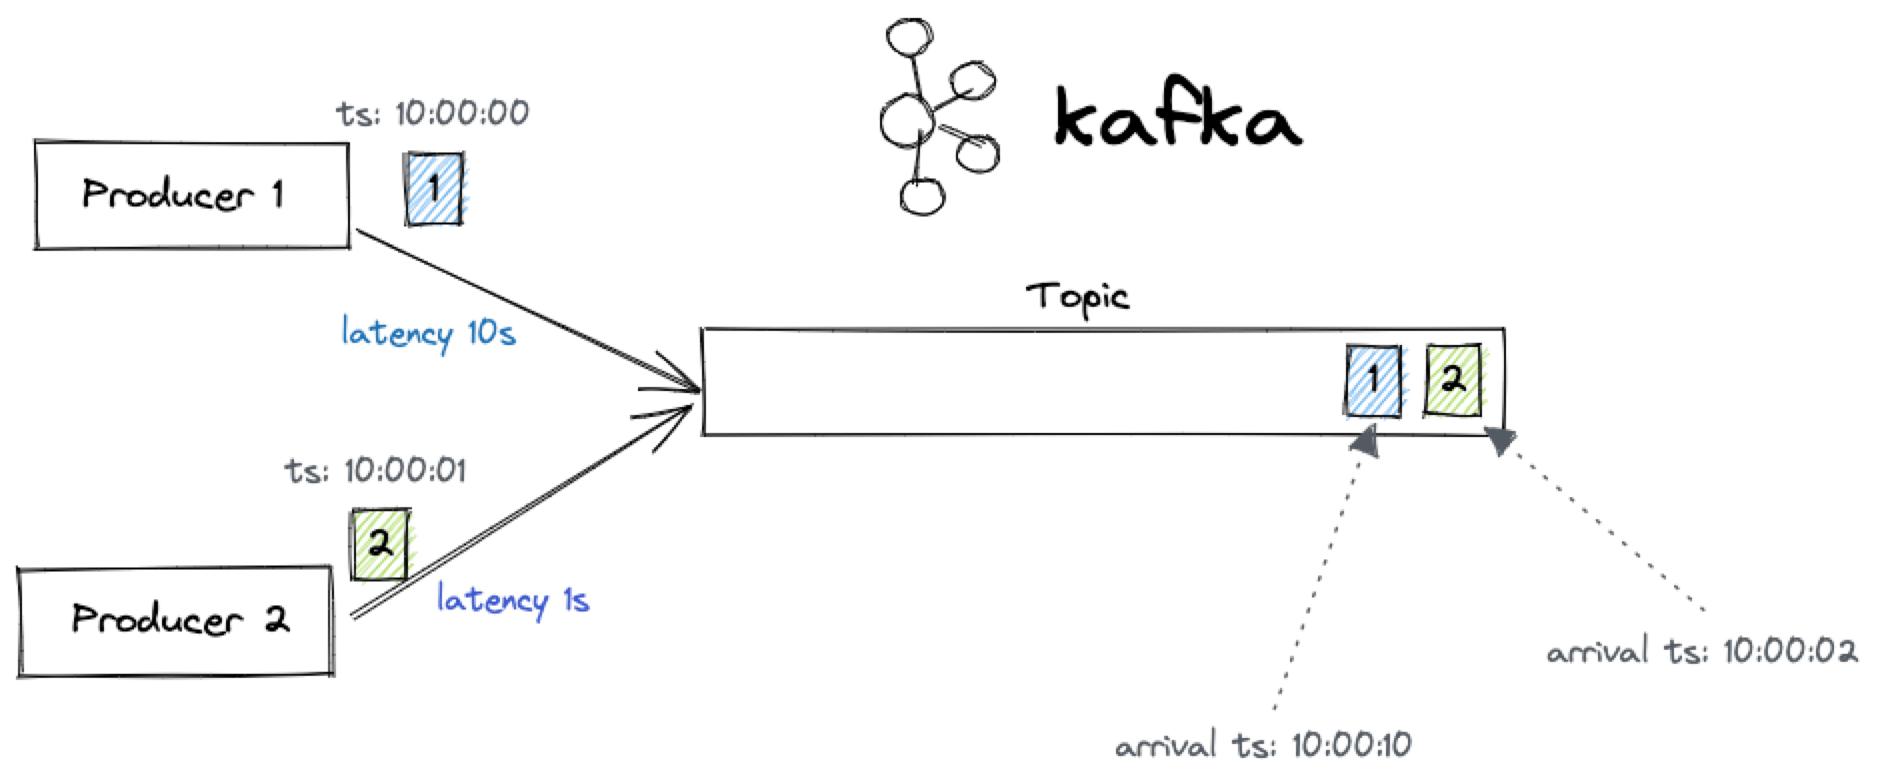 Two Kafka producers with different latency could mean that the resulting order is not what expected